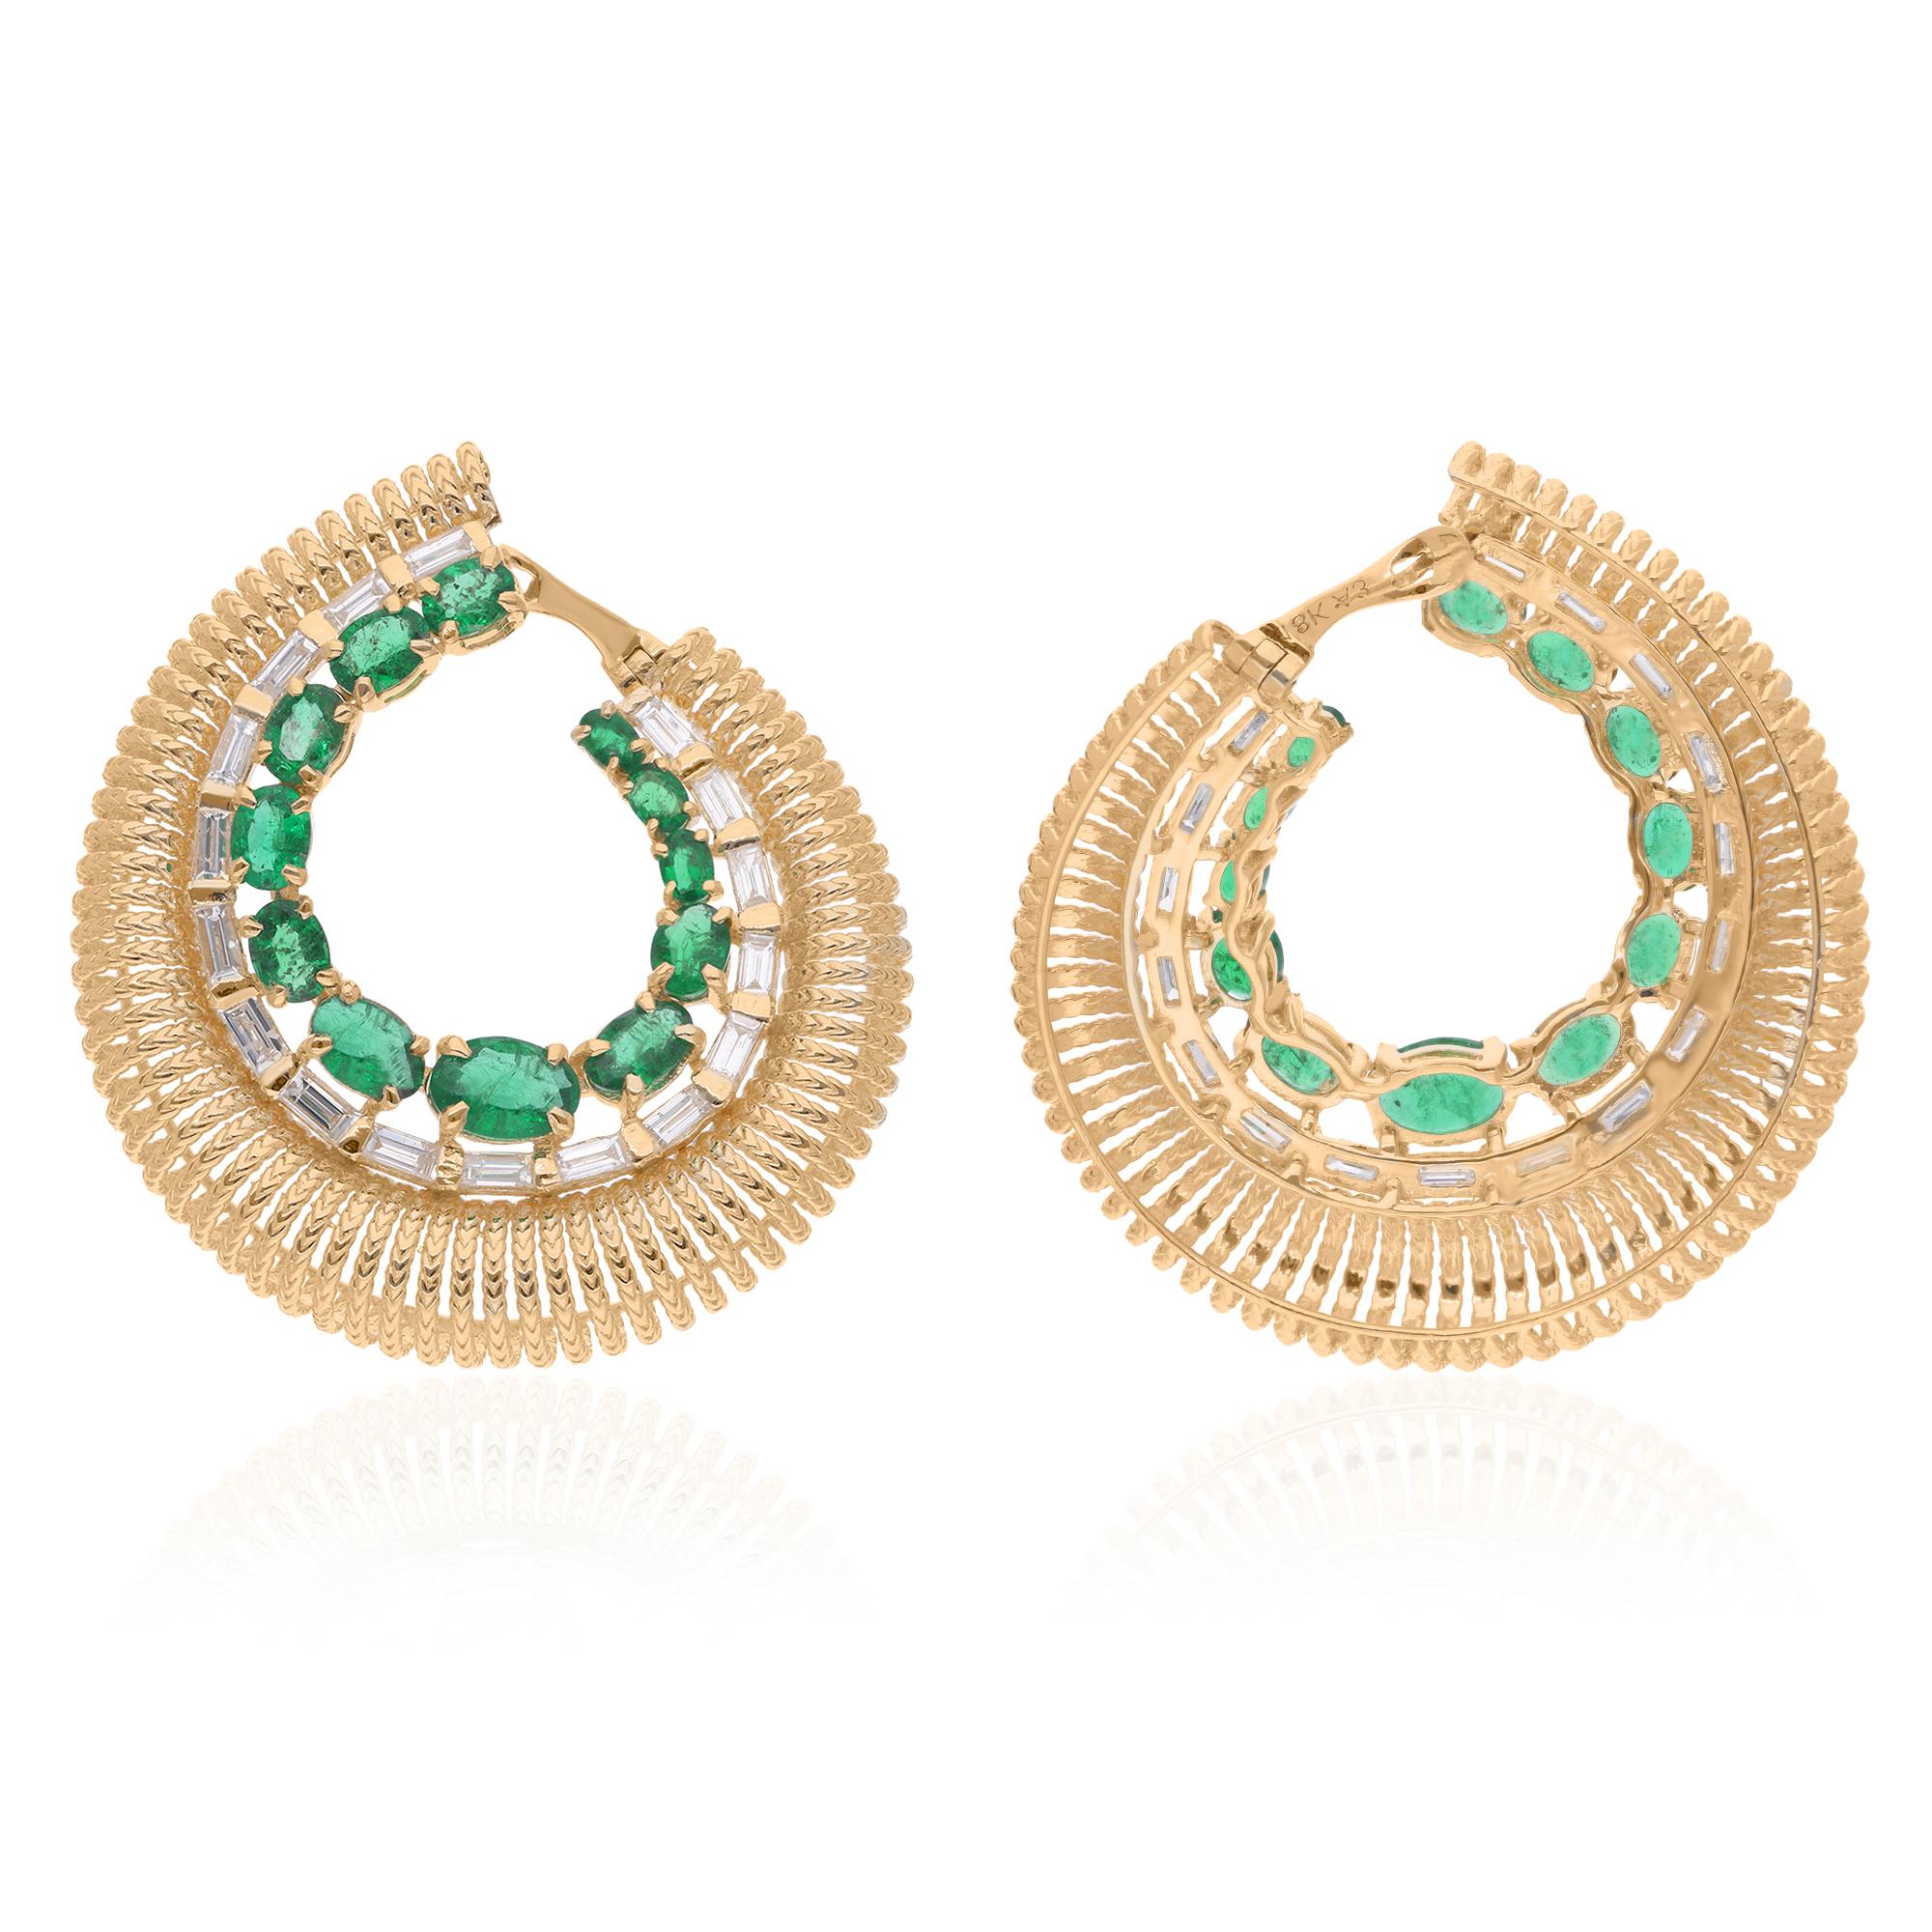 Step into a world of elegance and enchantment with these captivating Oval Zambian Emerald Hoop Earrings, adorned with shimmering Baguette Diamonds and expertly crafted in luxurious 18 Karat Yellow Gold. These exquisite earrings are a celebration of